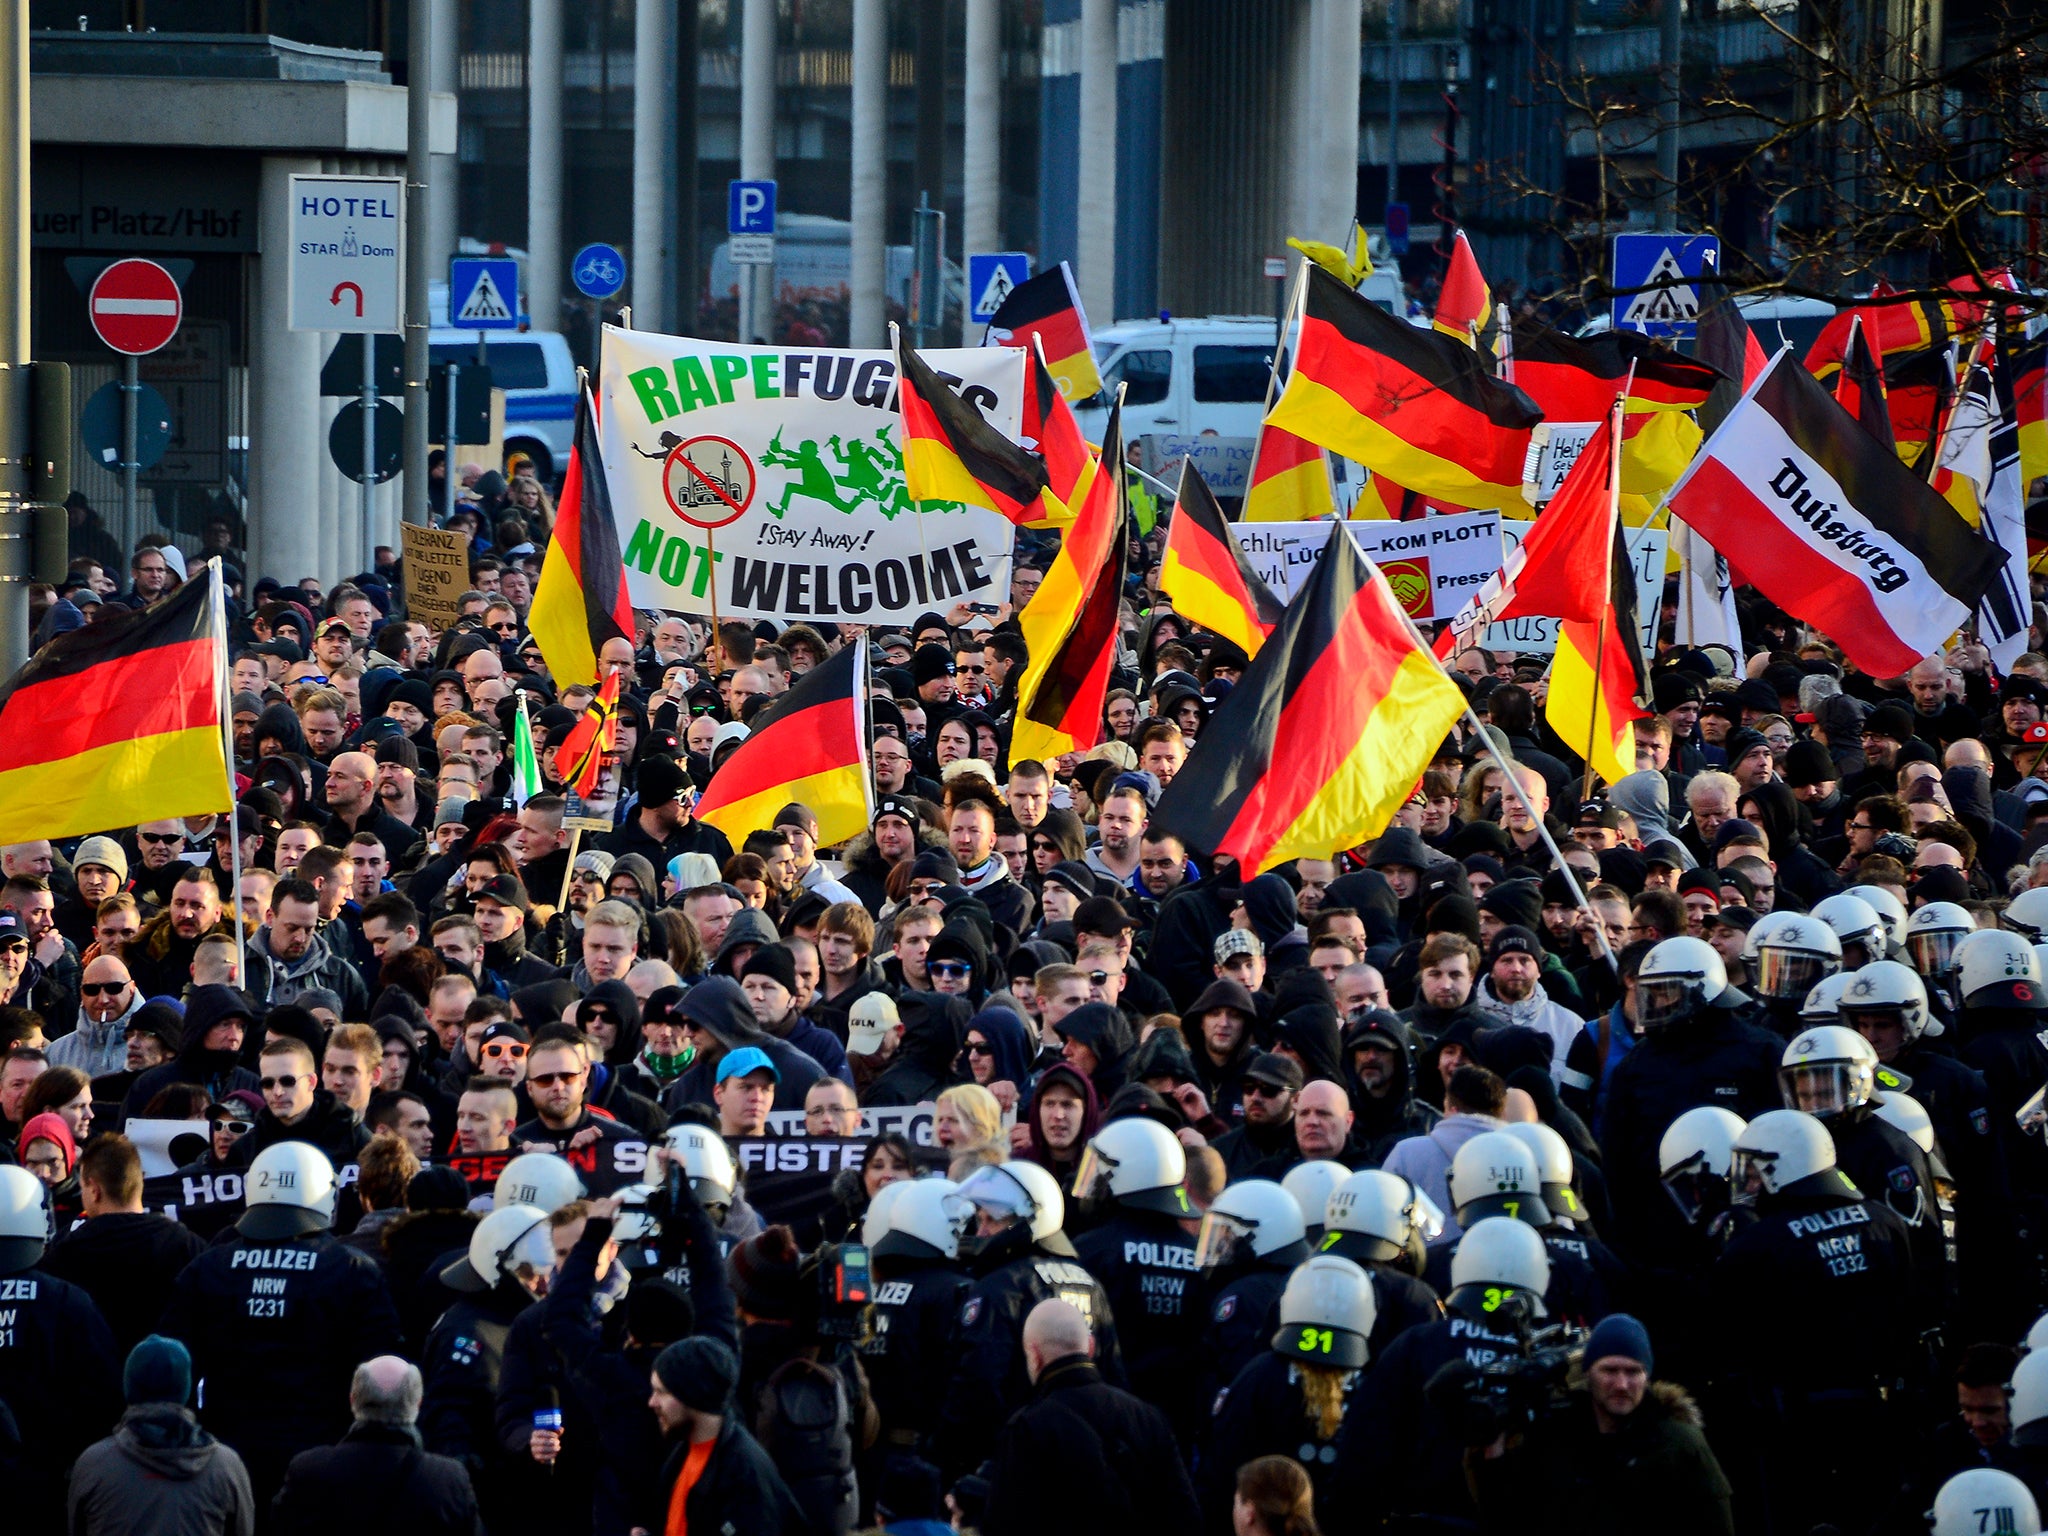 Germany has seen an increasing number of far-right demonstrations over the last few years